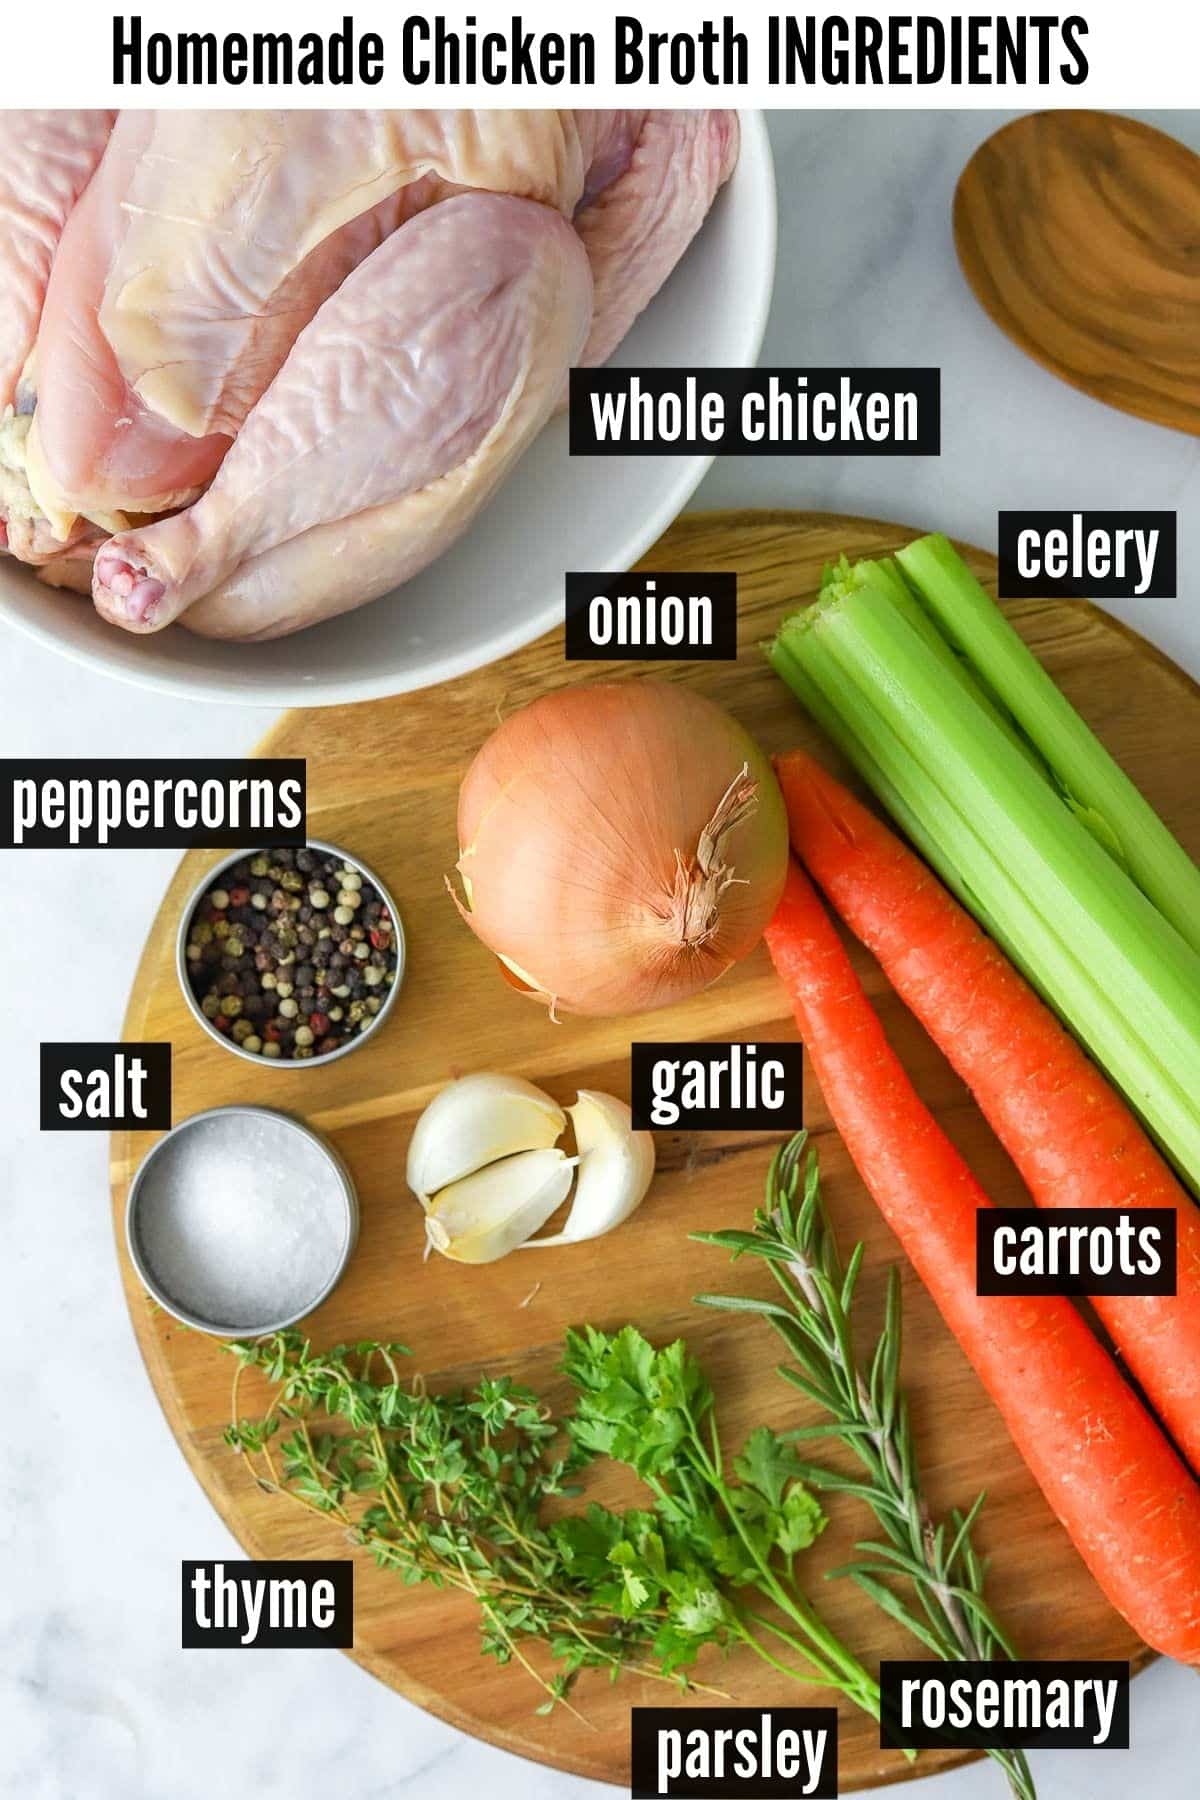 homemade chicken broth labelled ingredients